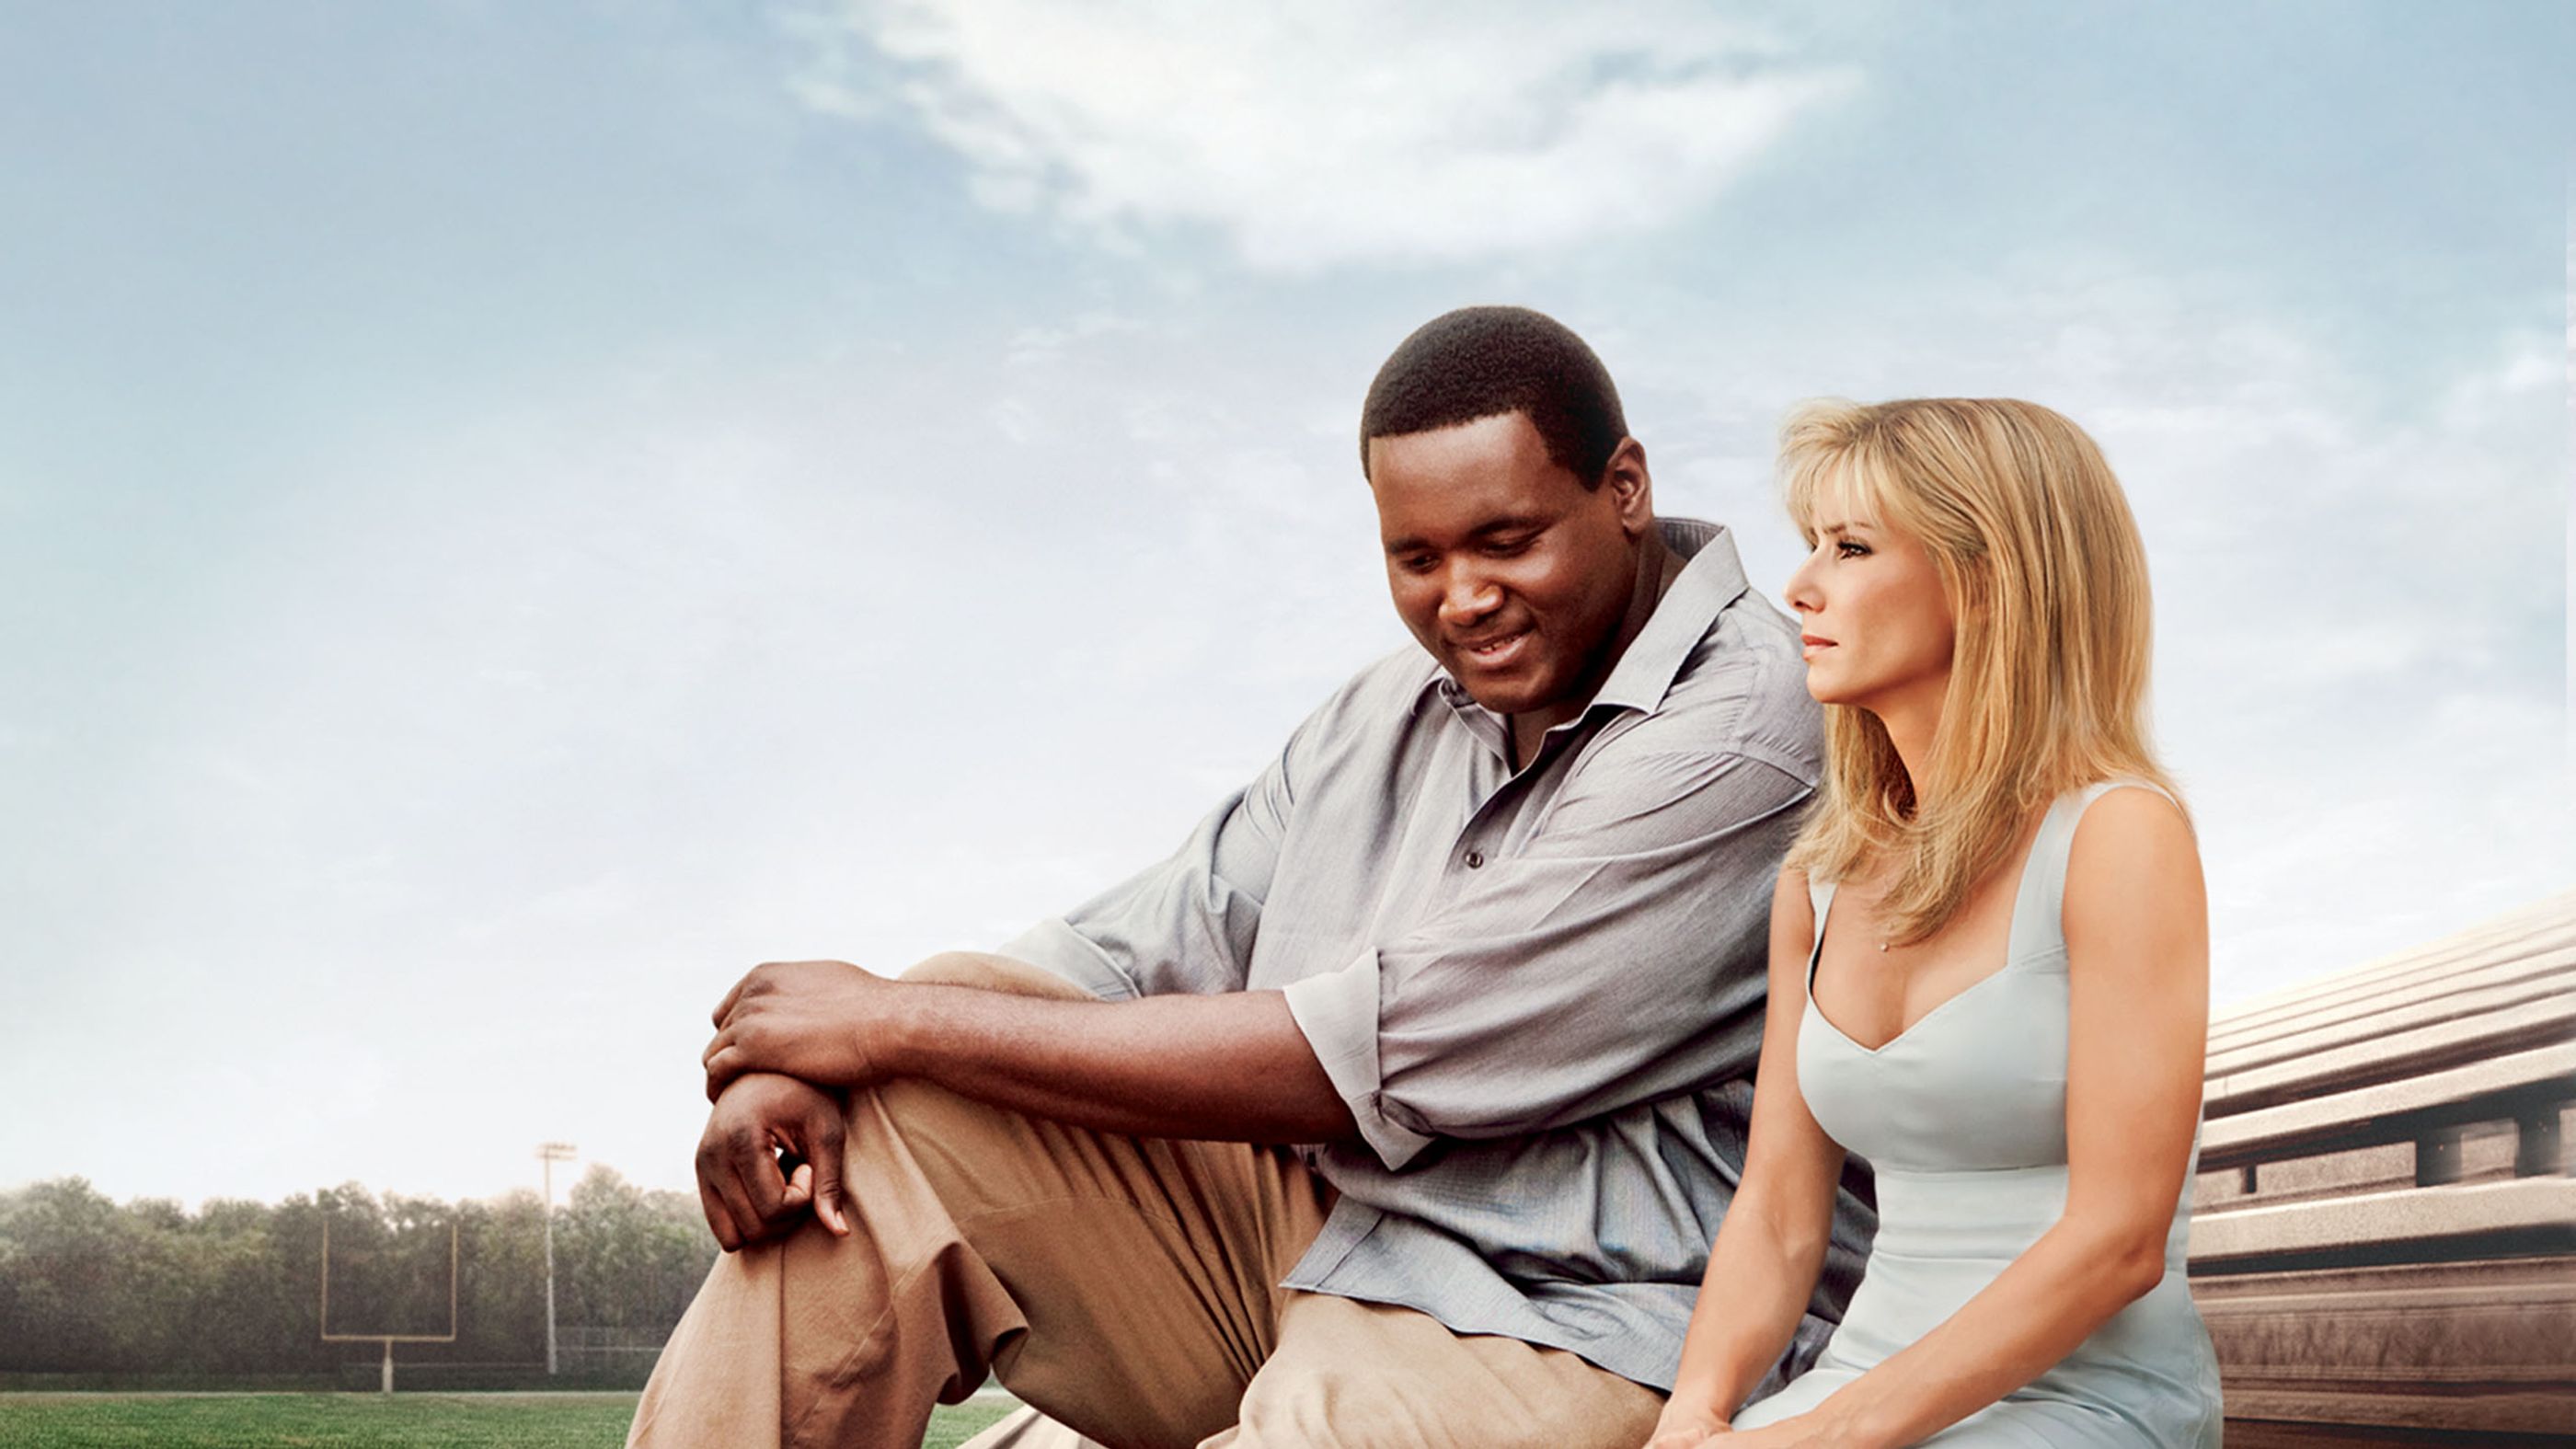 the blind side summary